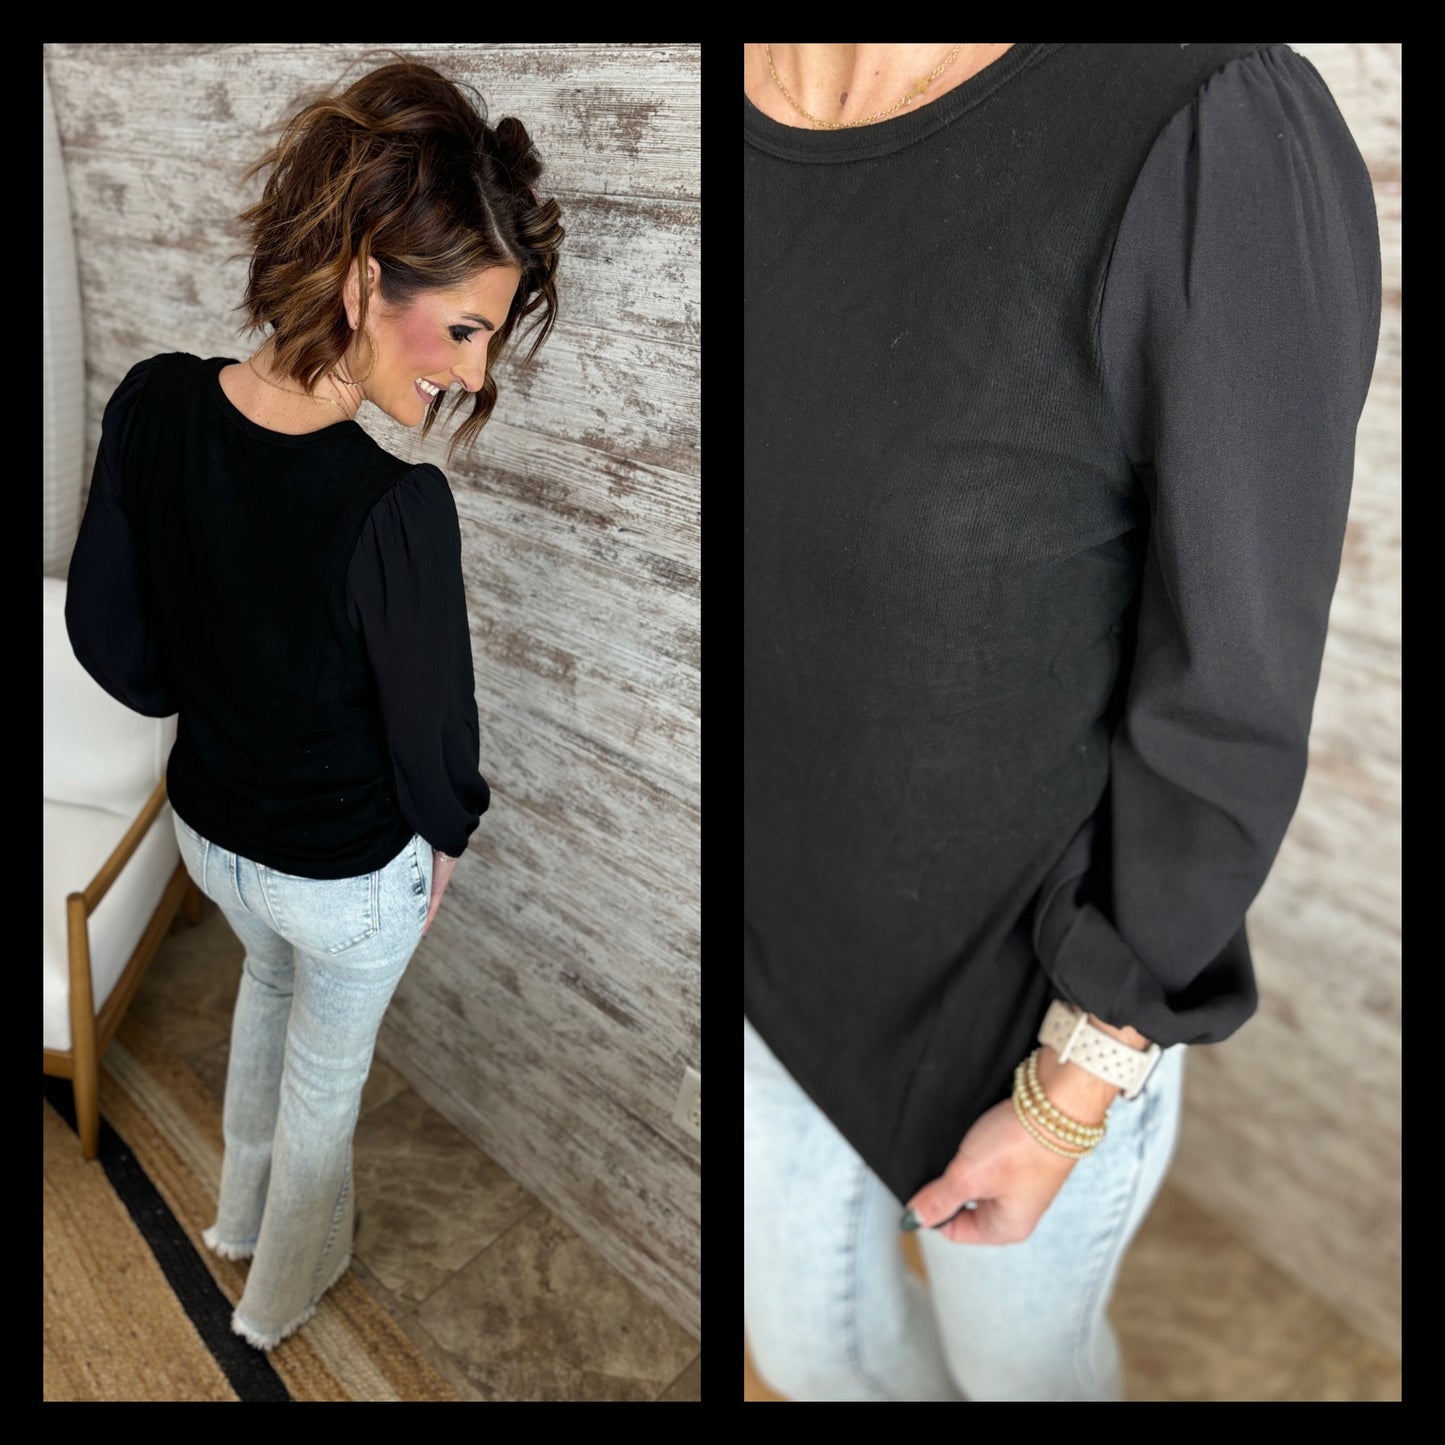 WOVEN PUFF SLEEVE KNIT TOP~2 Colors